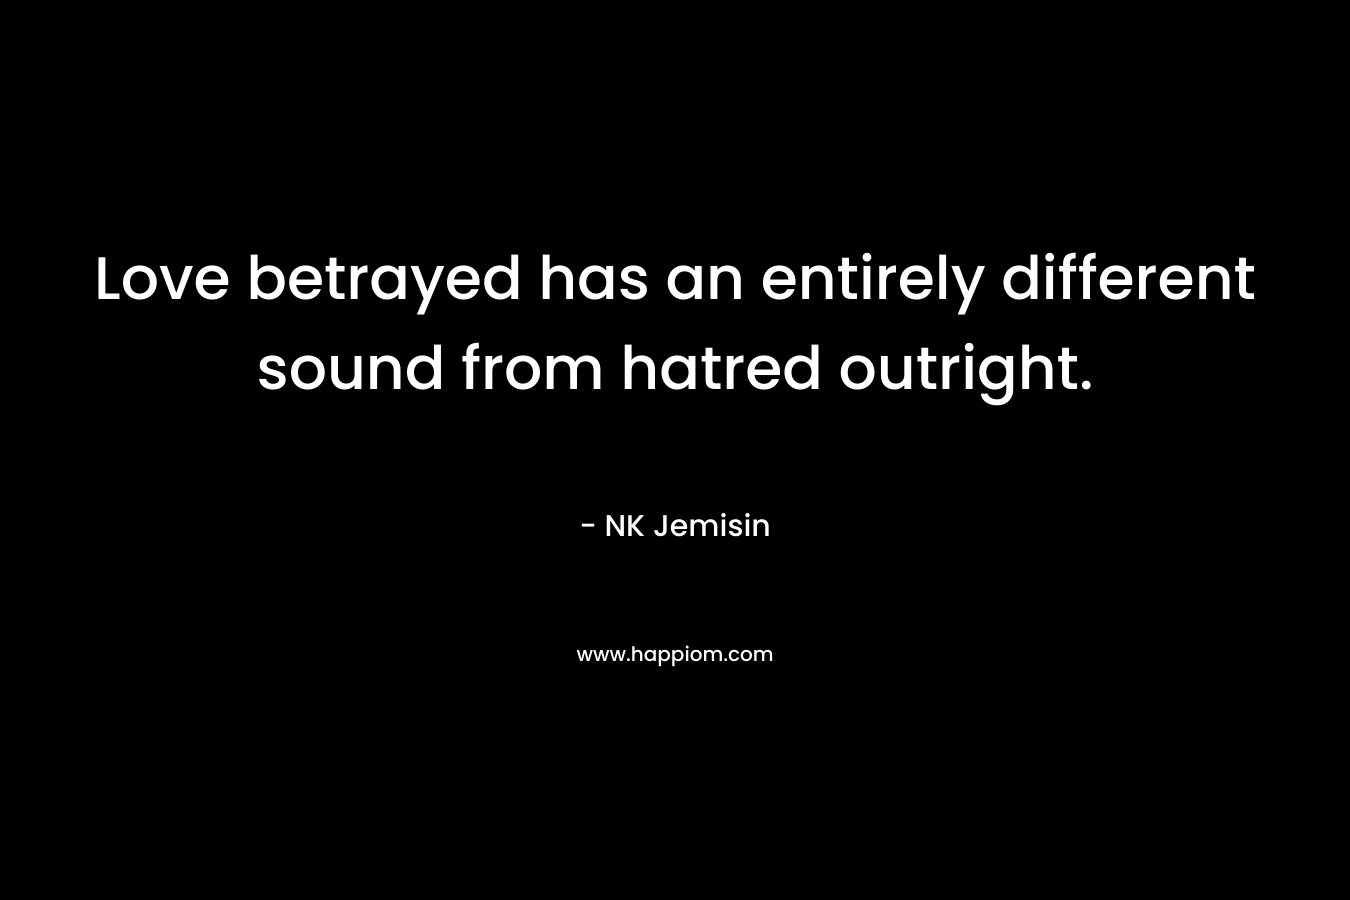 Love betrayed has an entirely different sound from hatred outright.